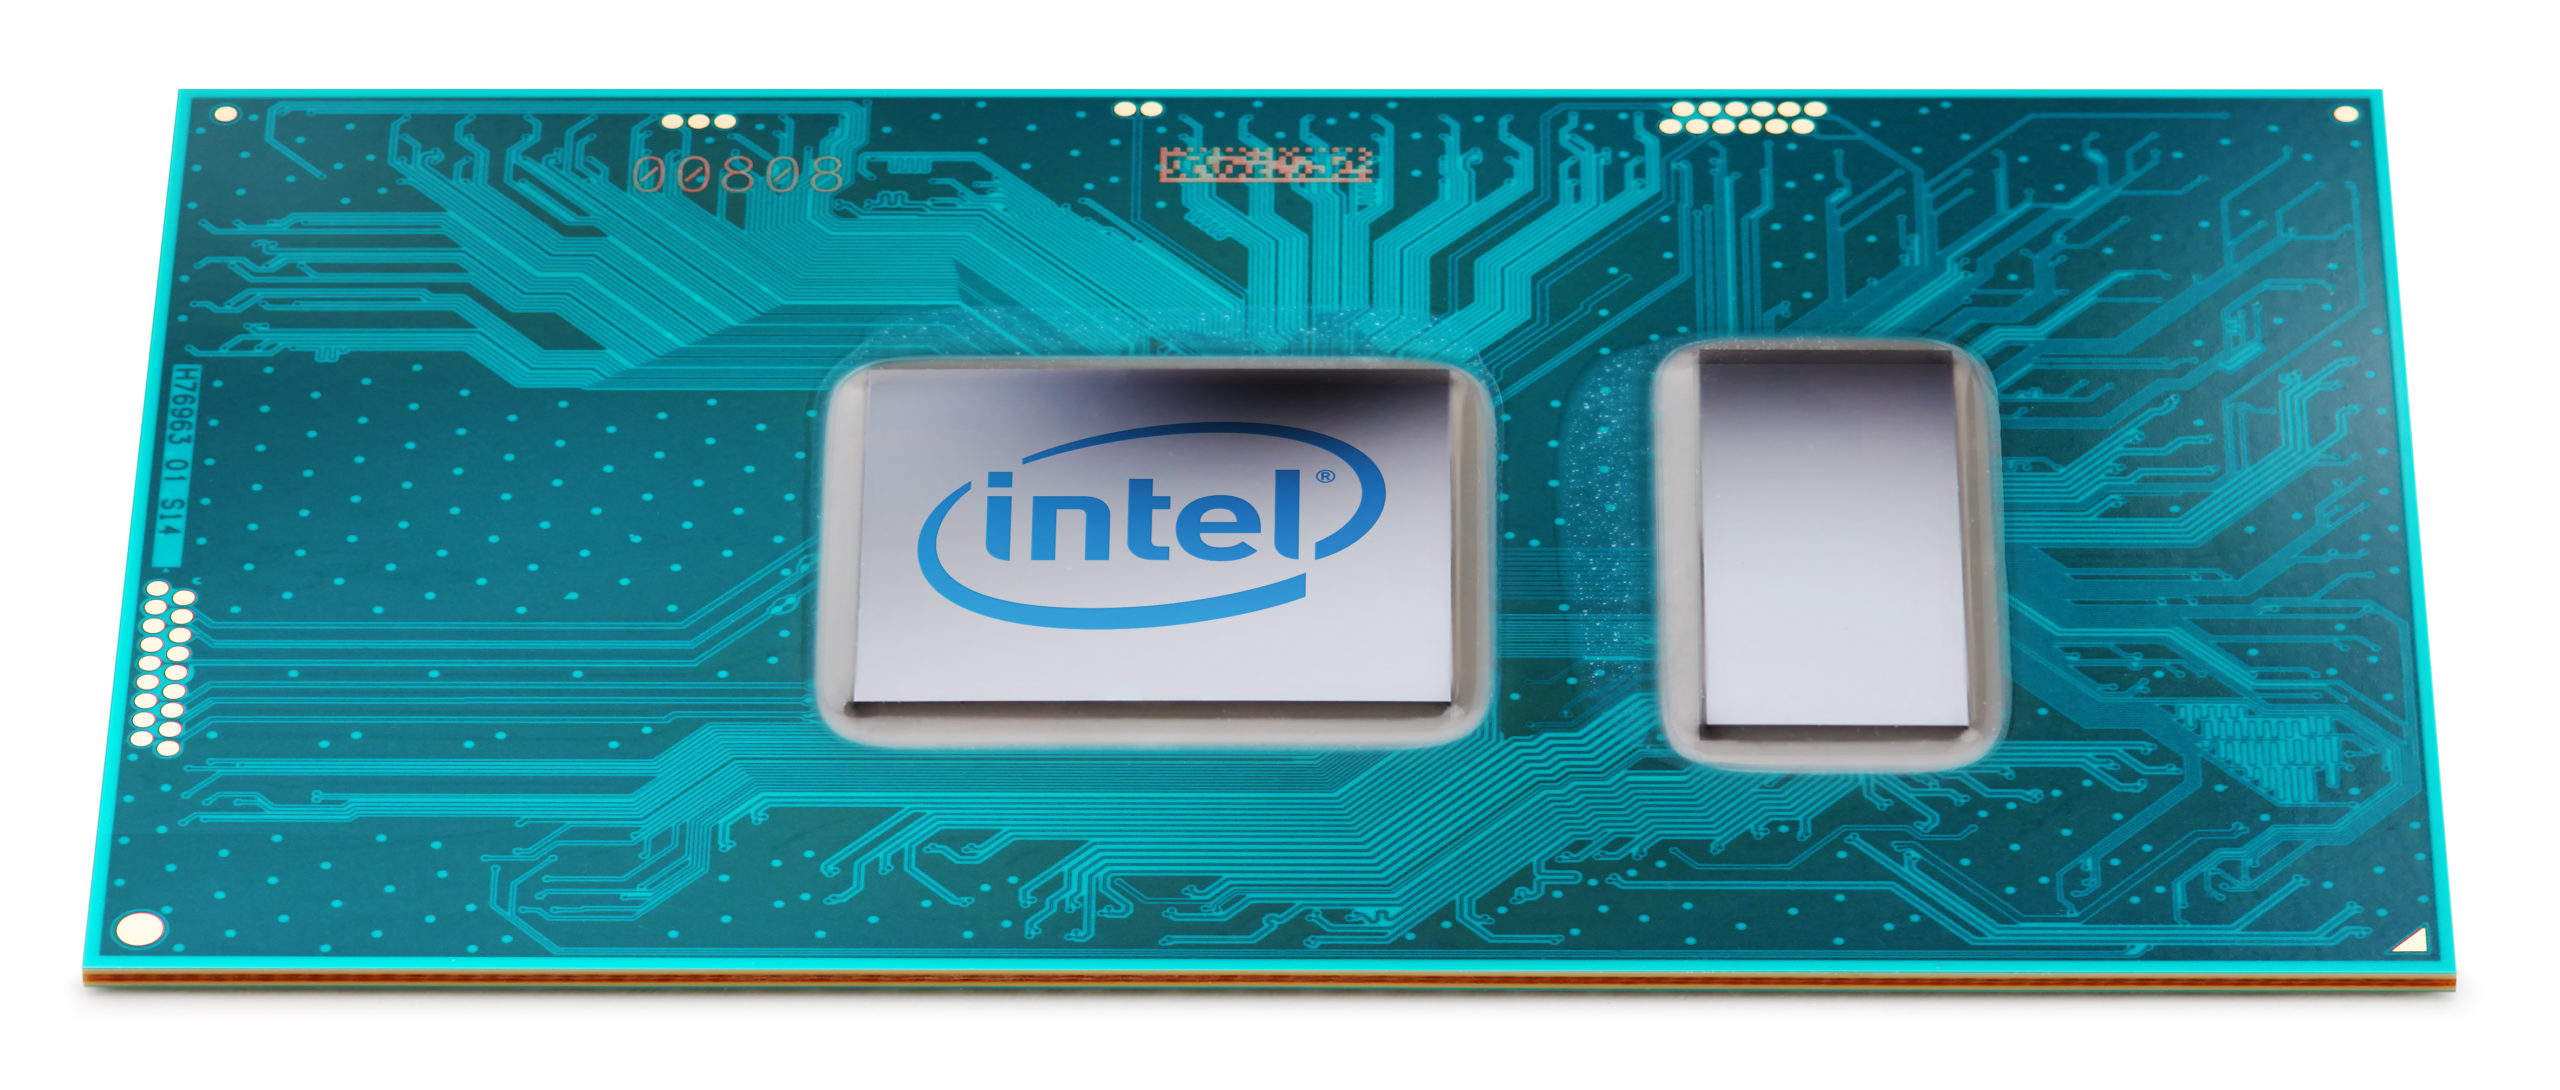 Intel’s New Kaby Lake Processors: What You Need To Know